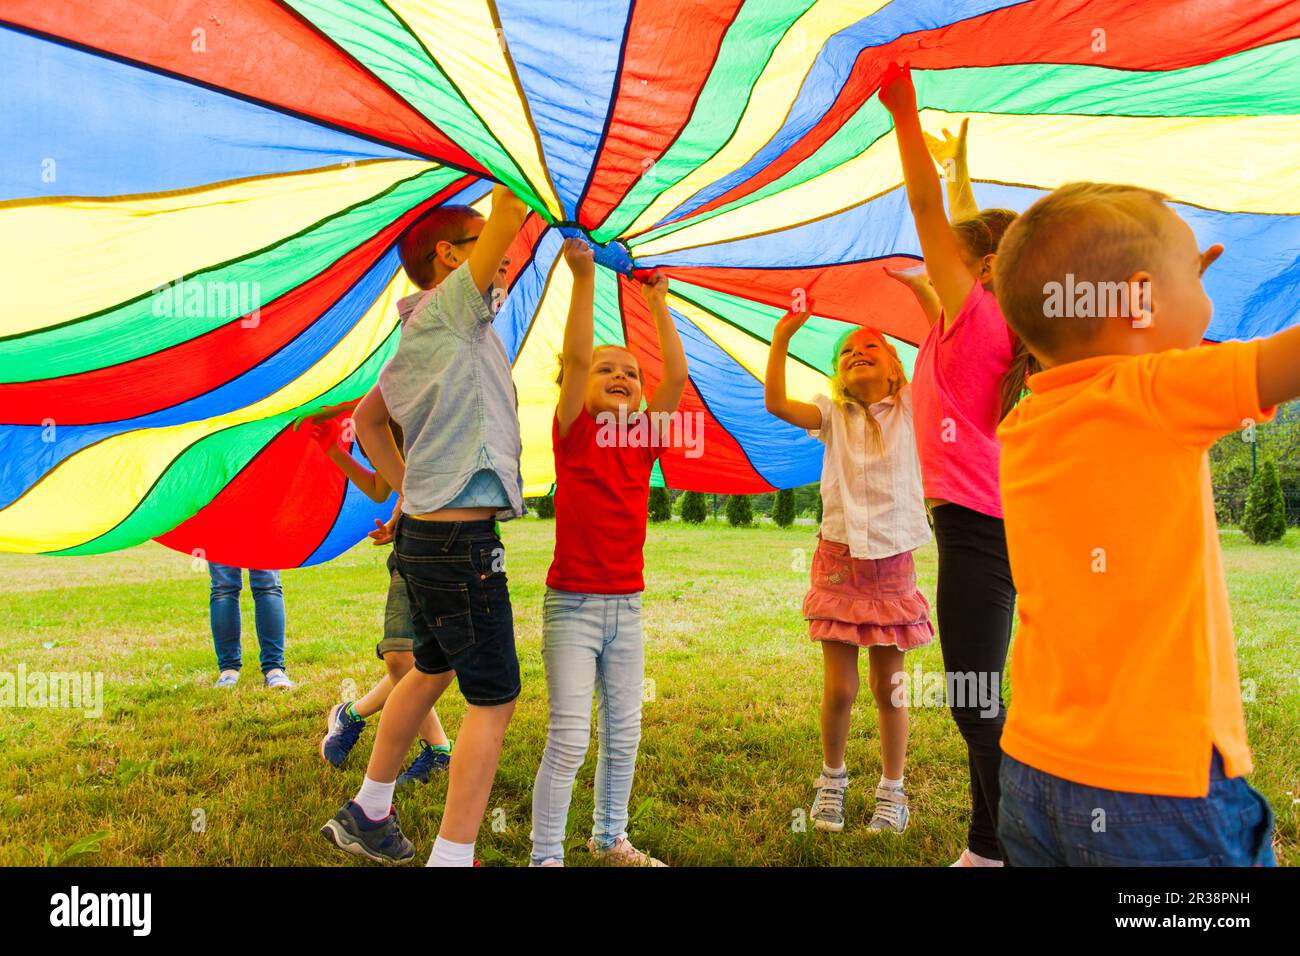 Fun and joy under colorful tent outdoors in the summer Stock Photo